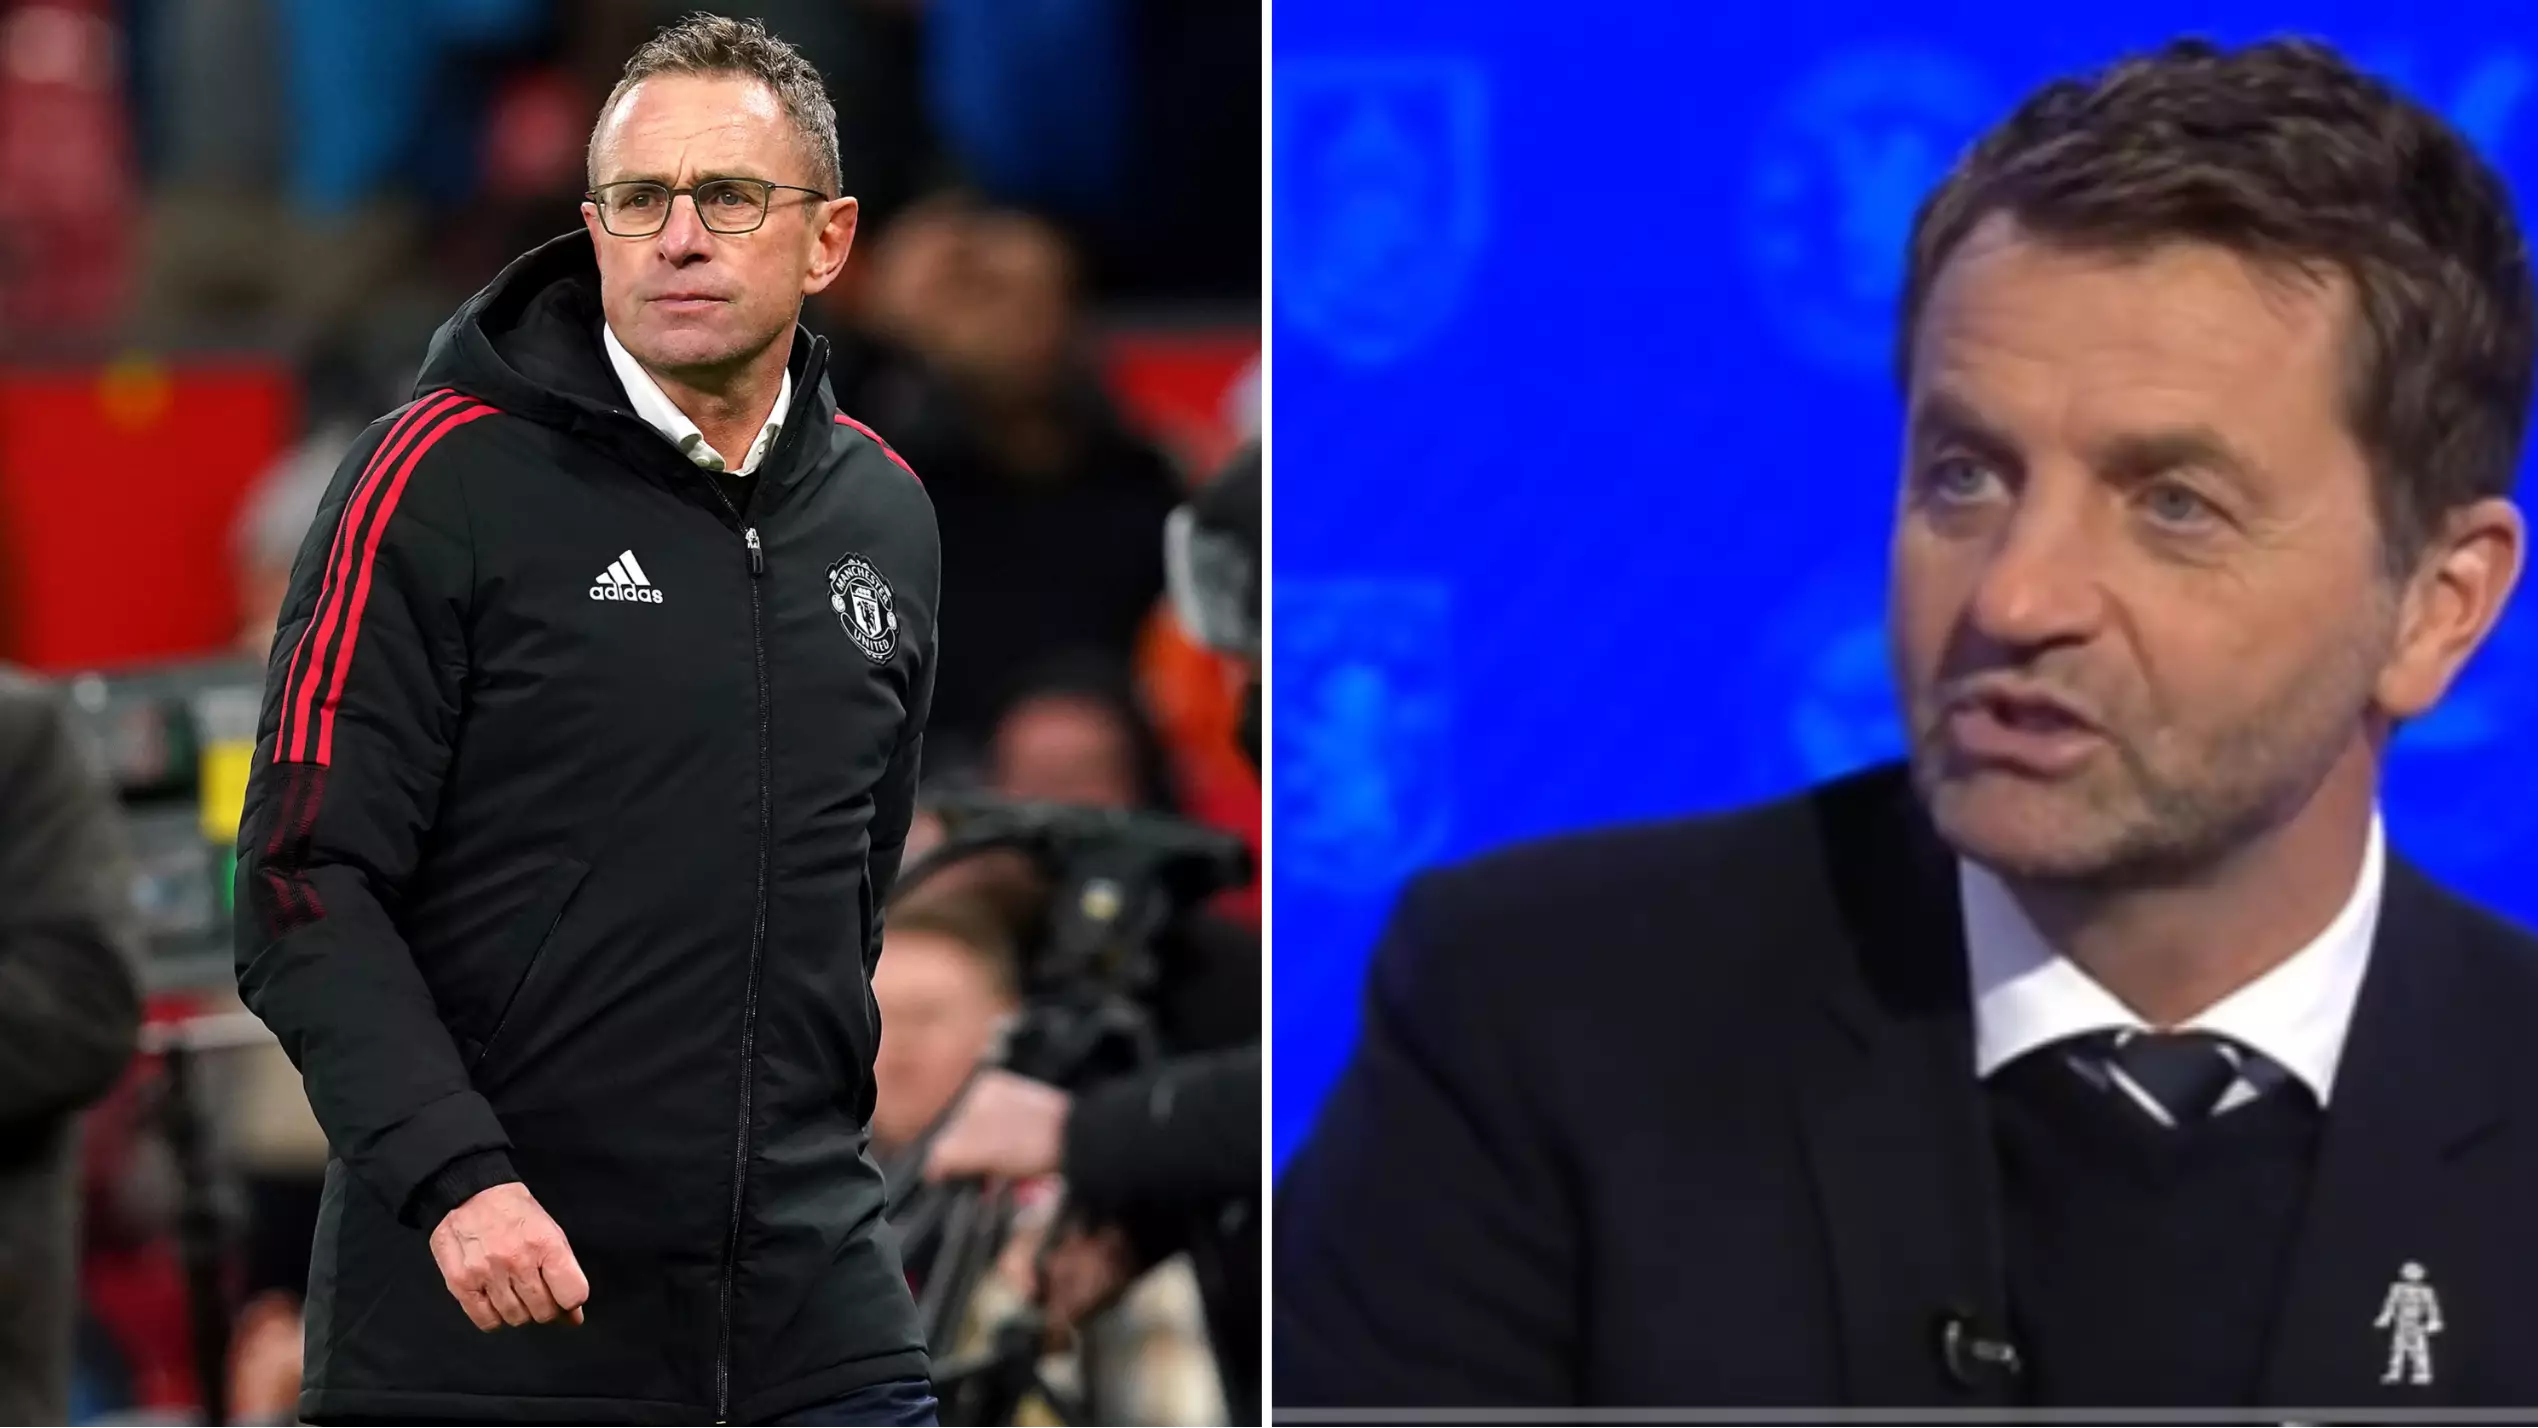 Tim Sherwood Says Man United Fans “Need To Relax” Over Ralf Rangnick Appointment